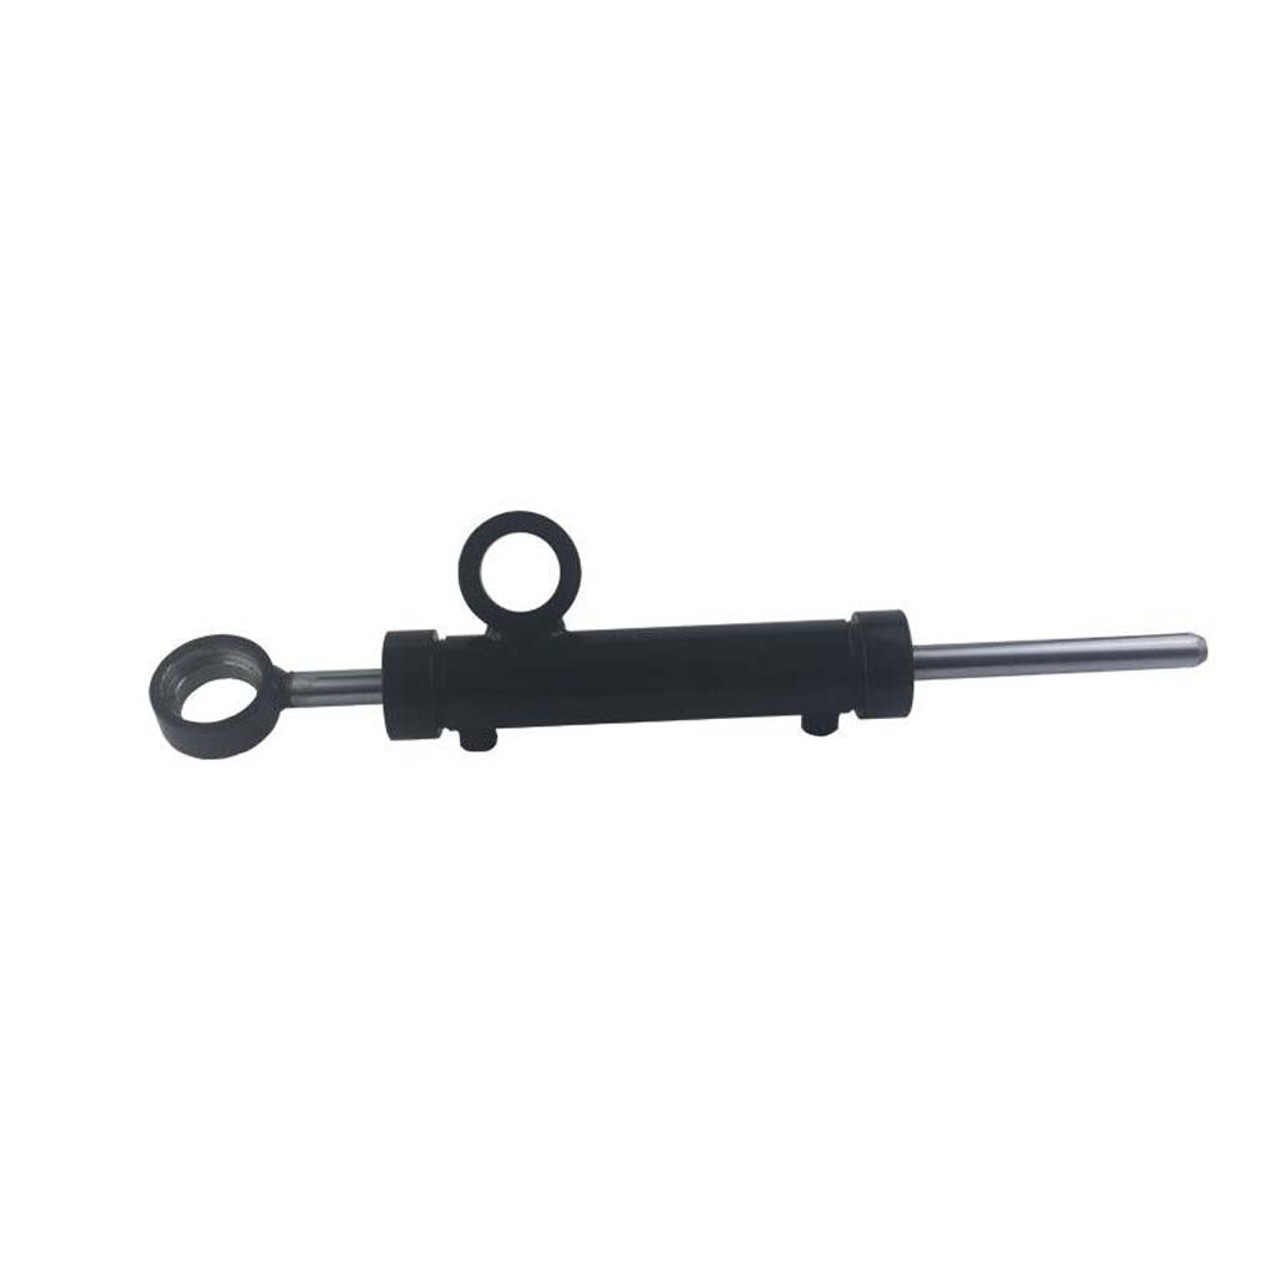 New Steering Cylinder - Replaces Toro 132-3778